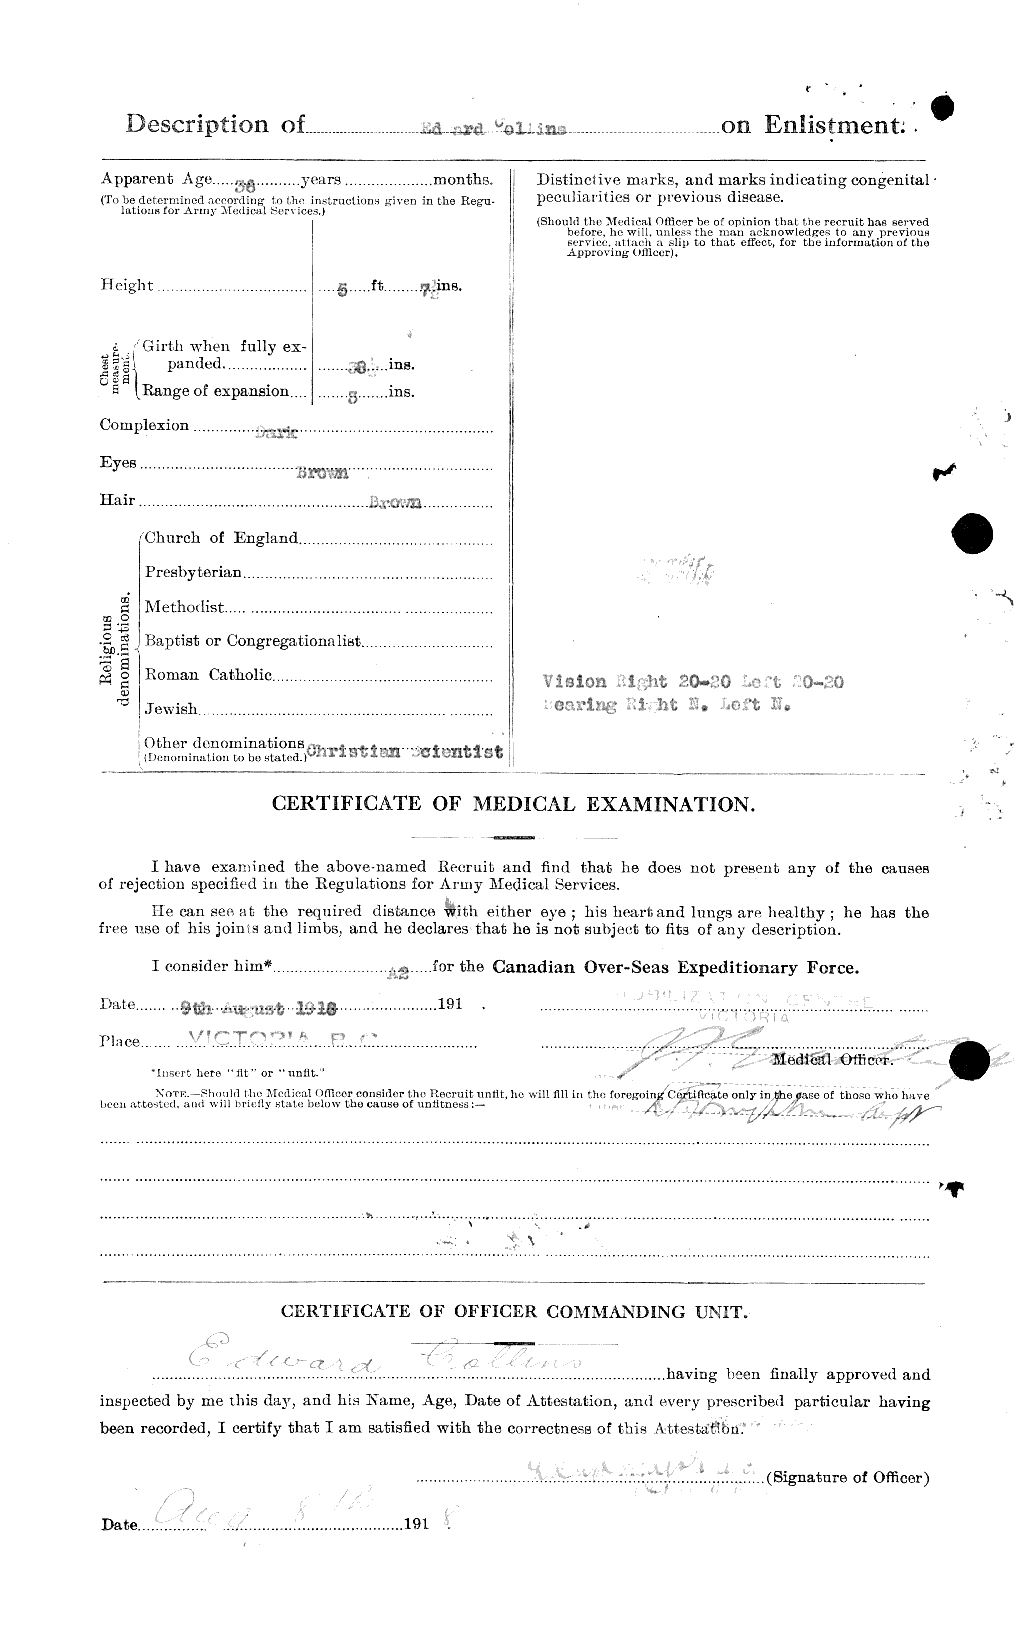 Personnel Records of the First World War - CEF 037743b